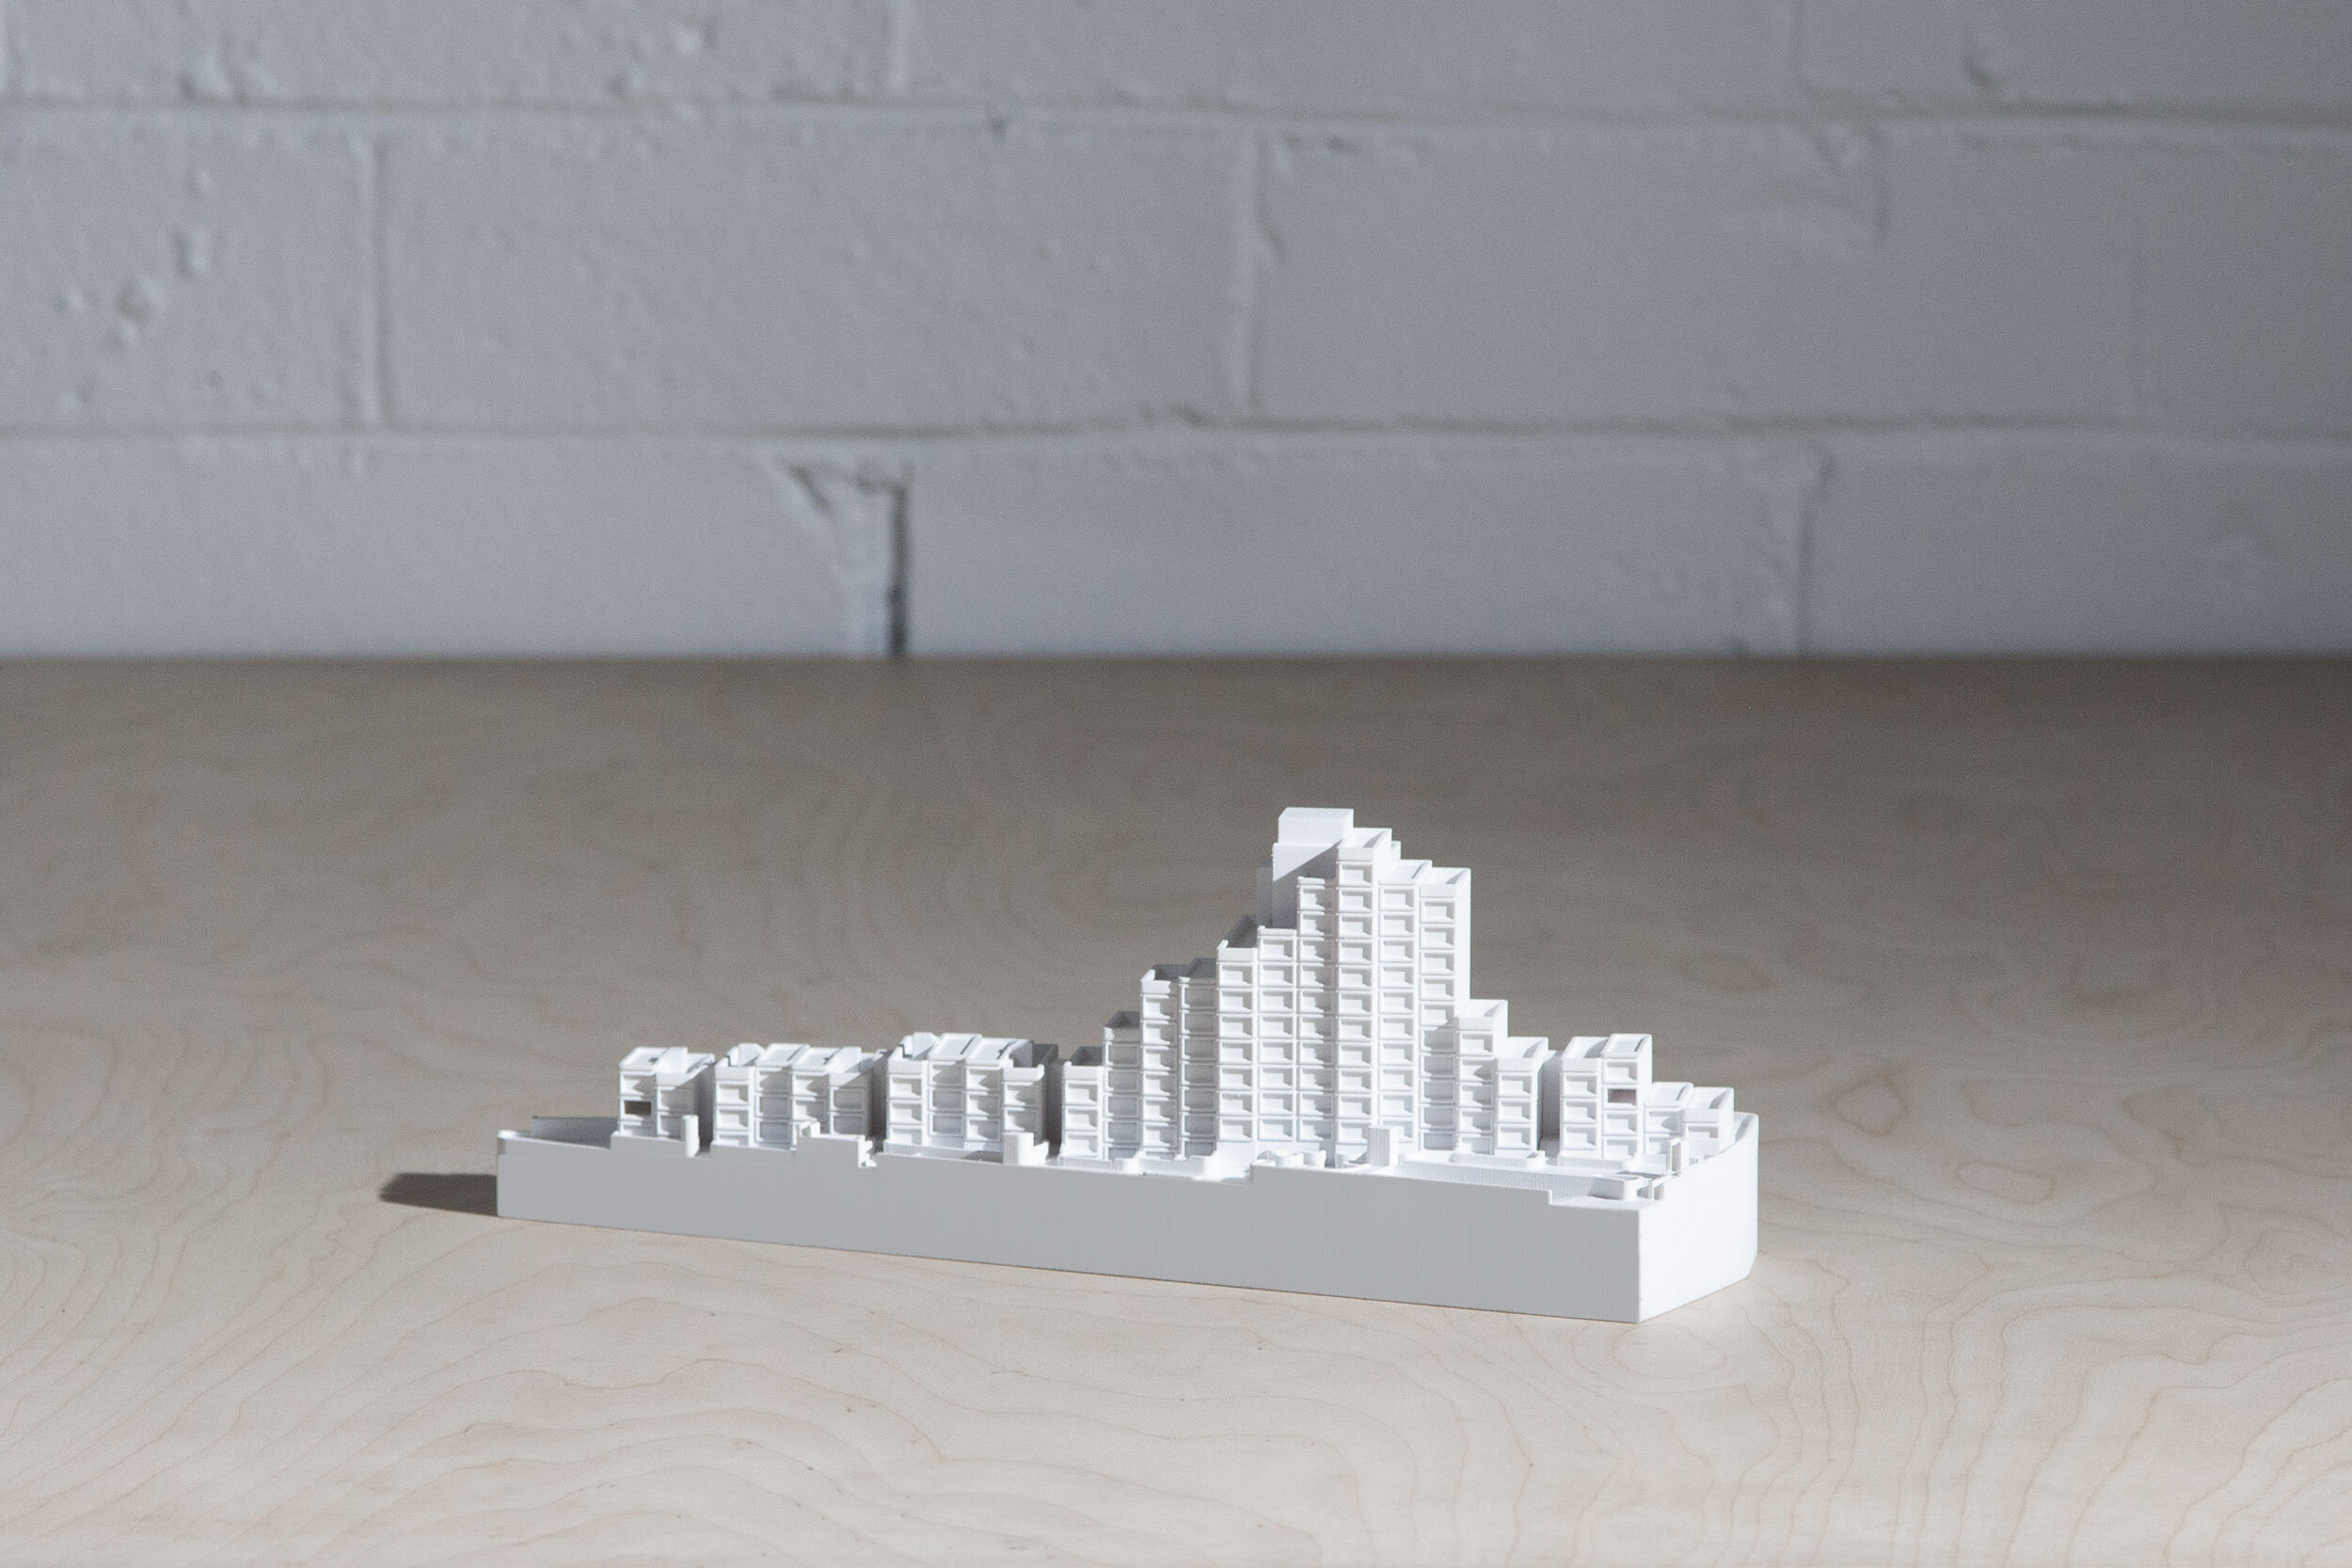  High resolution 3D printing Sydney detailed quality architecture design prototype service art 